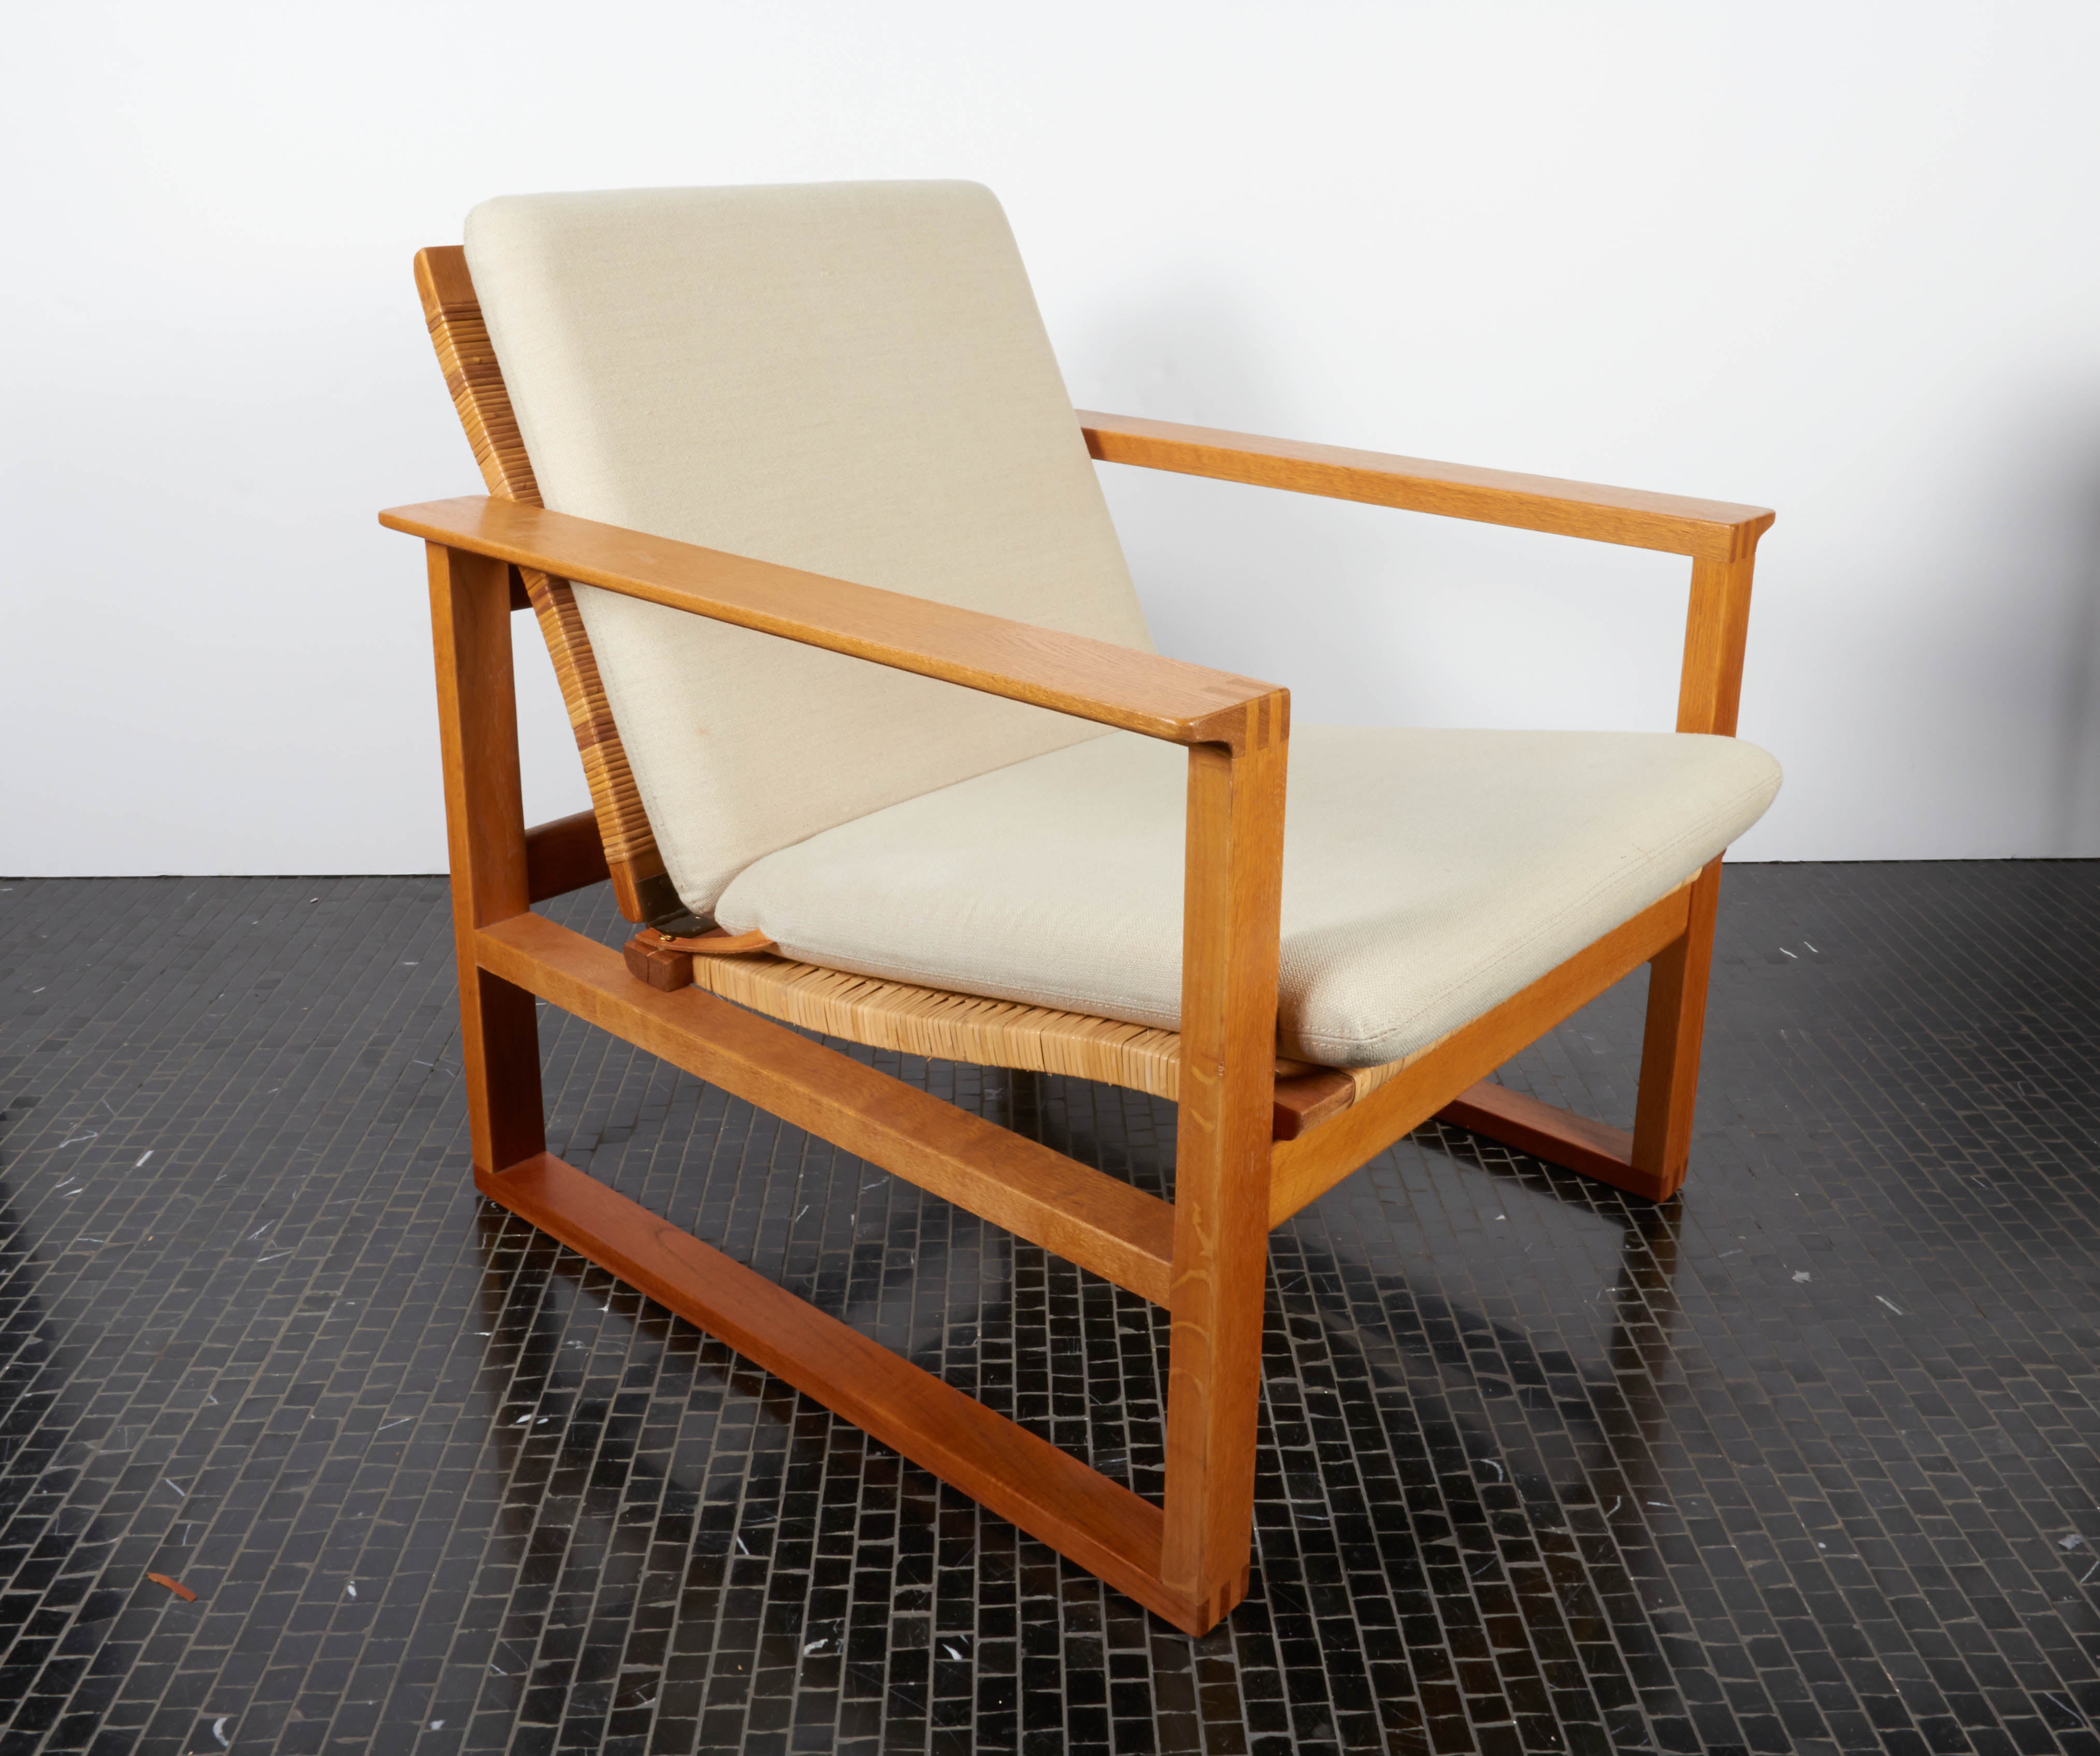 Pair of Borge Mogensen Lounge Chairs with Cane and Linen Seats on Oak Frames